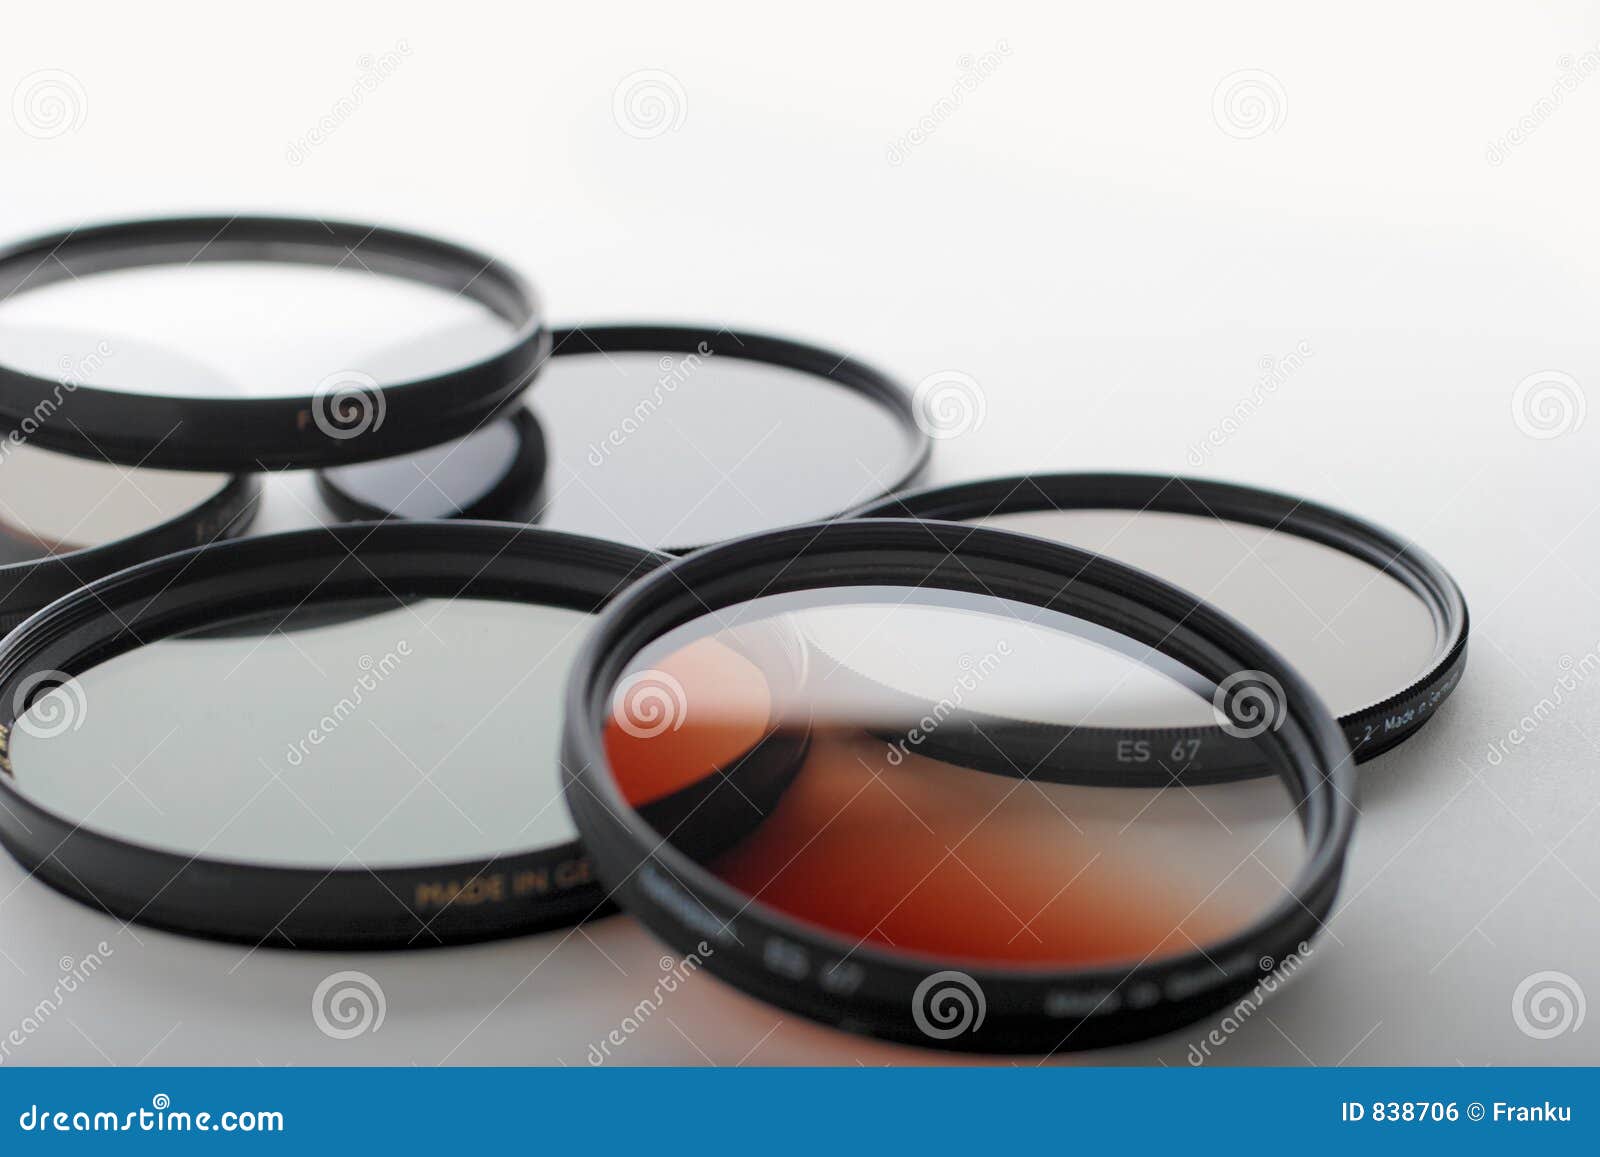 photo filters and lens hood